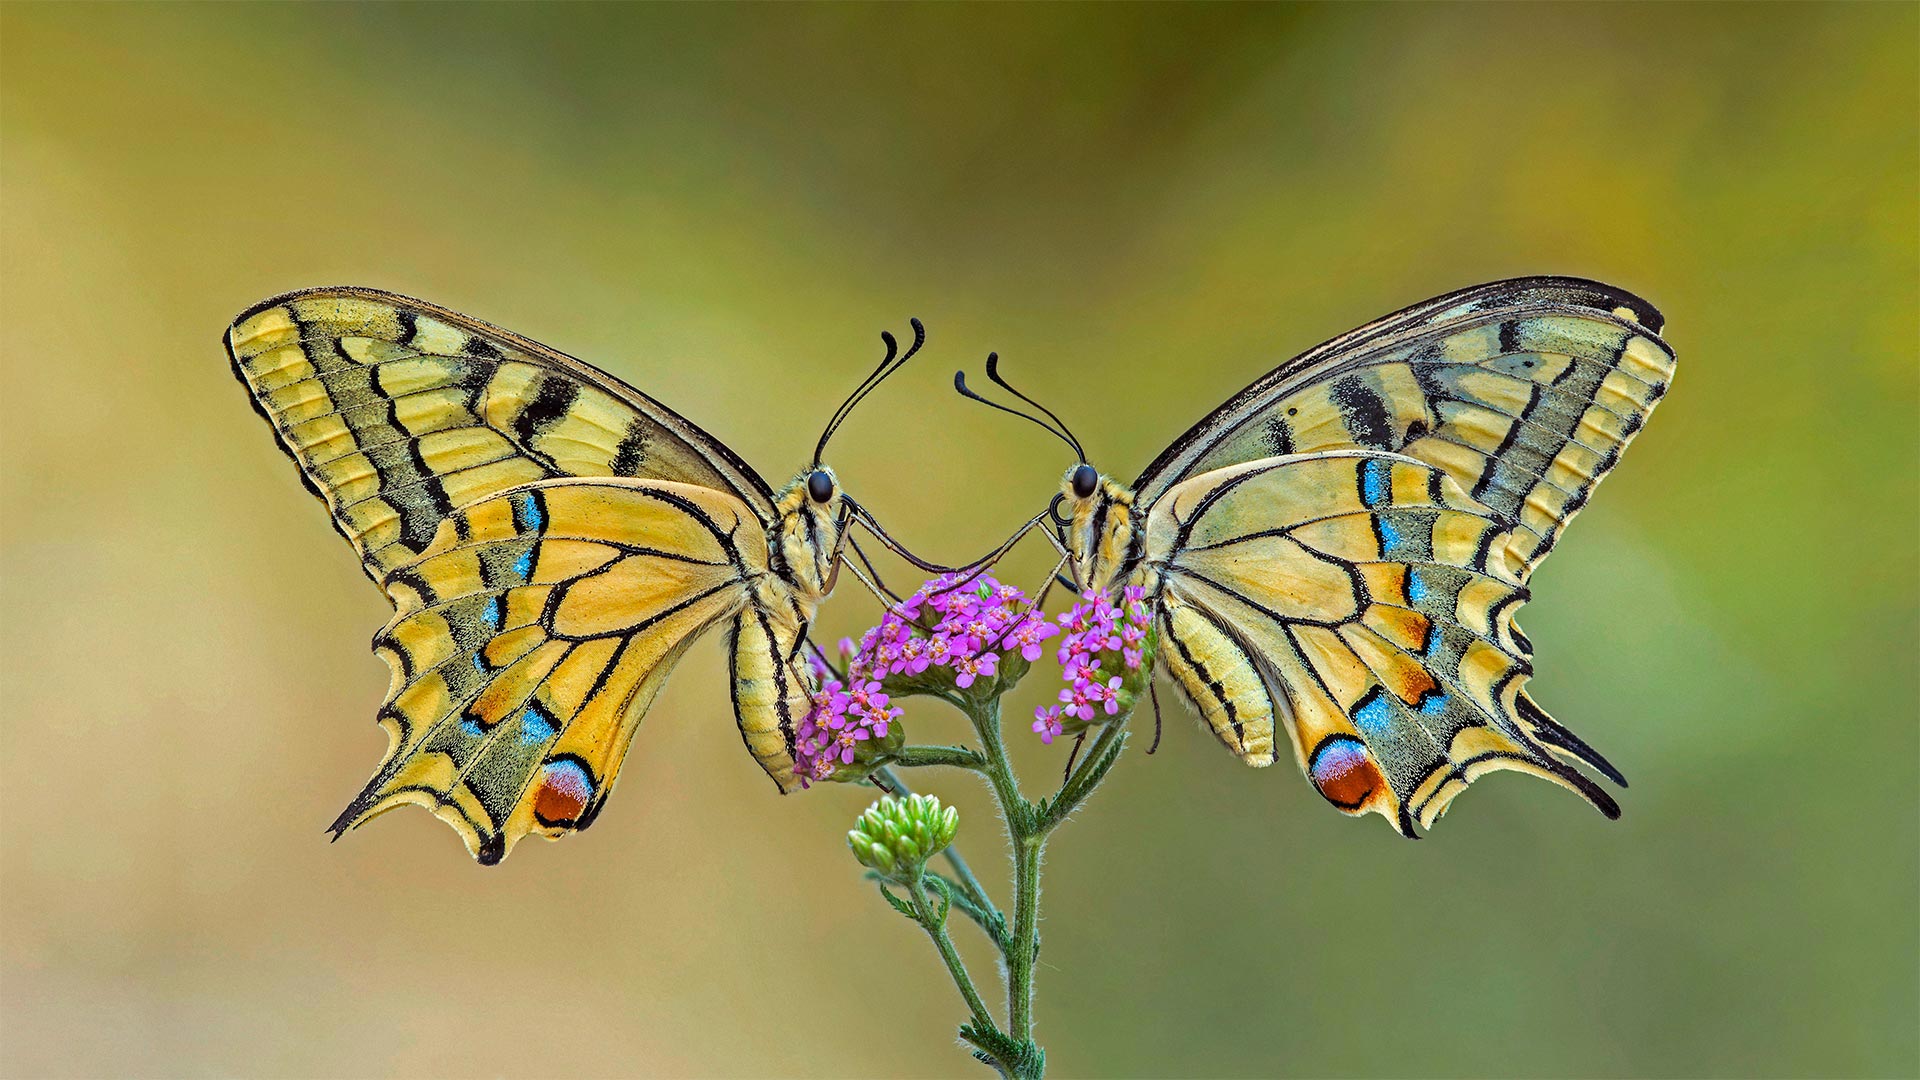 Old World swallowtail butterflies on a flower - Alberto Ghizzi Panizza/Getty Images)